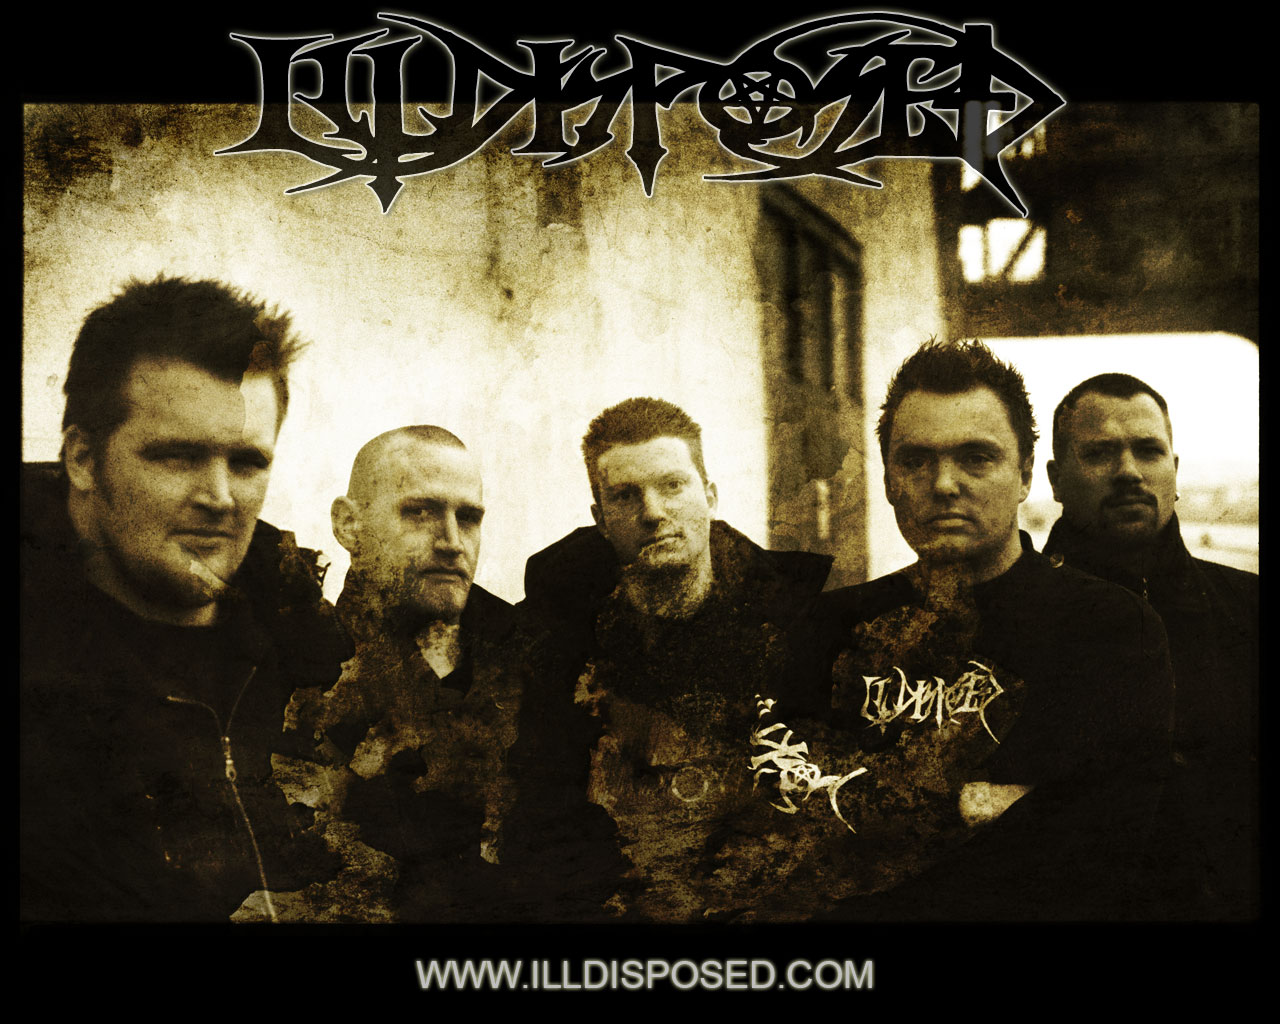 Download full size Illdisposed wallpaper / Music / 1280x1024